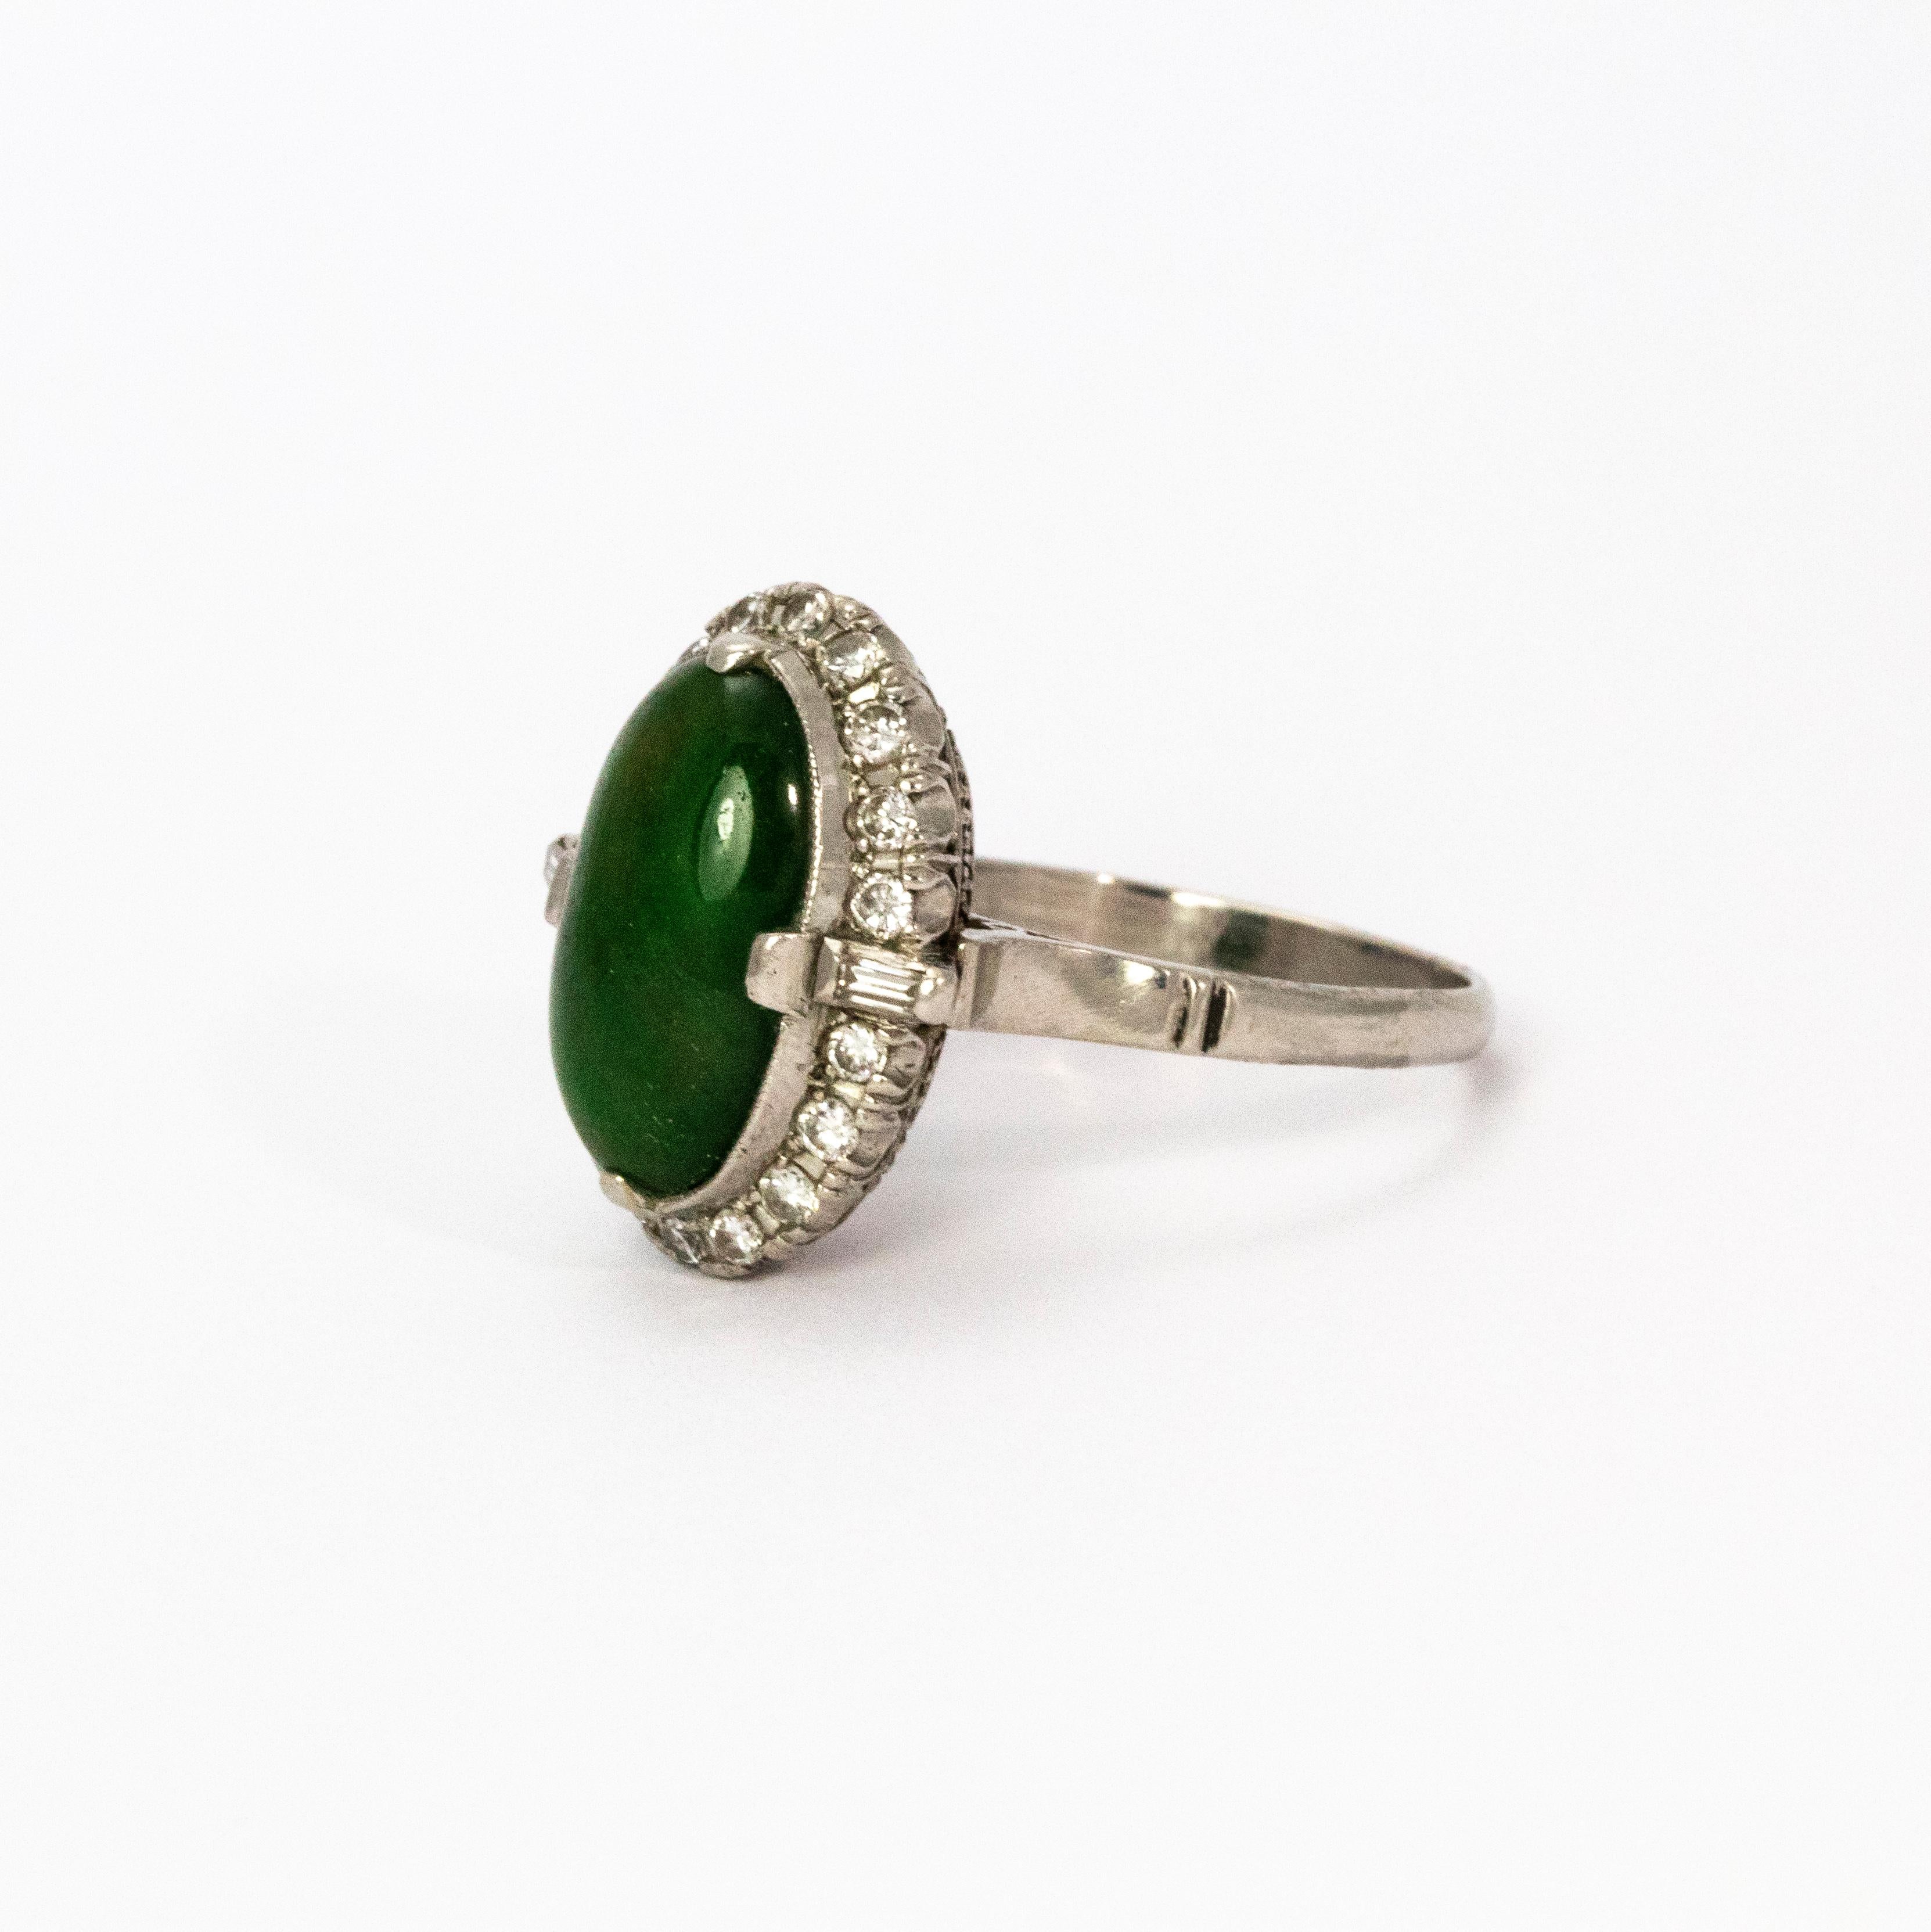 A stunning 1940s cluster ring. Centrally set with a wonderful large jade cabochon measuring approximately 4 carat, surrounded by an elegant halo of round brilliant cut diamonds. Each shoulder is set with an emerald cut diamond. Modelled in 18 karat